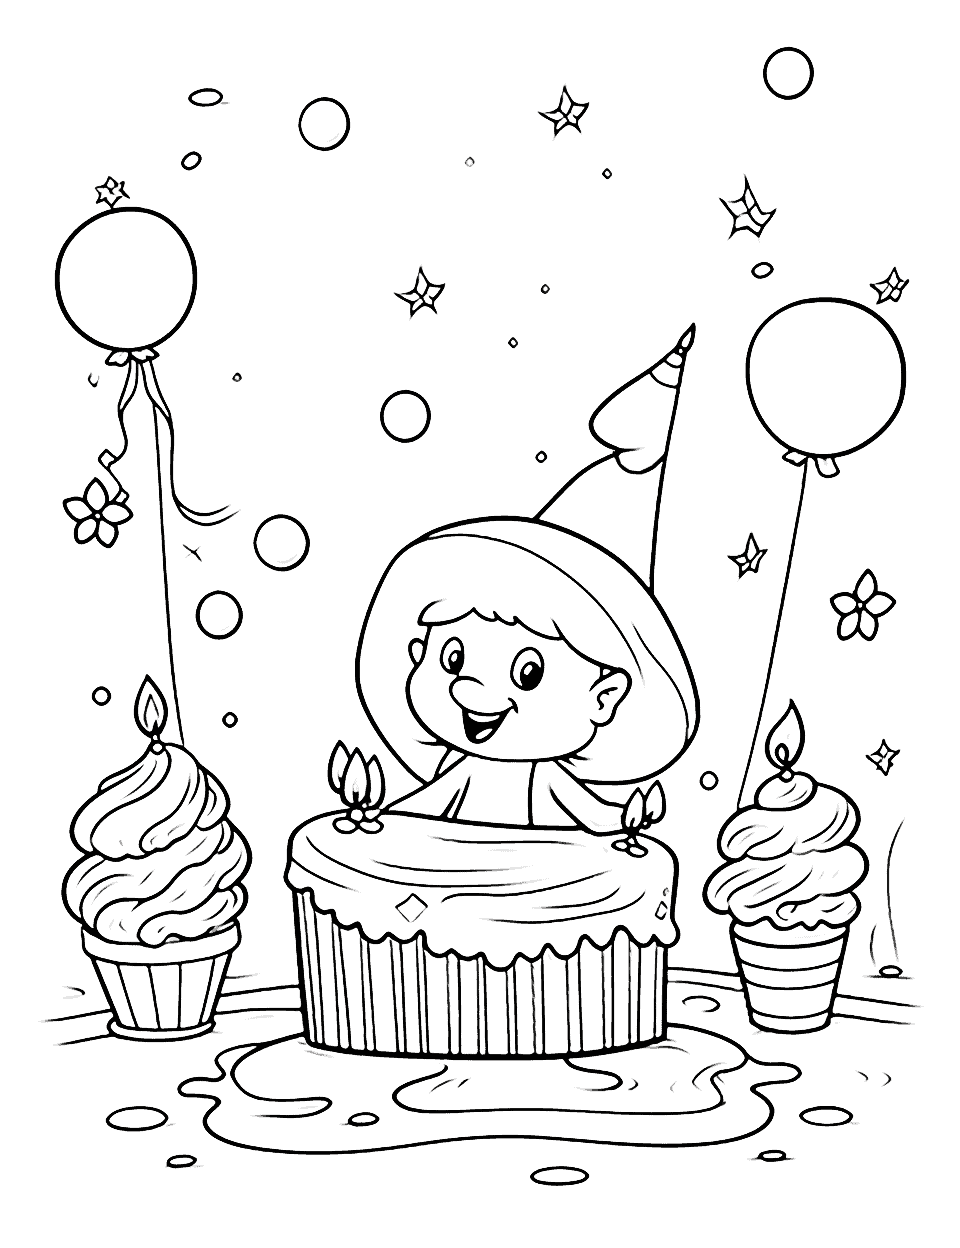 Smurf's Blue Birthday Happy Coloring Page - A Smurf celebrating its birthday in Smurf Village.